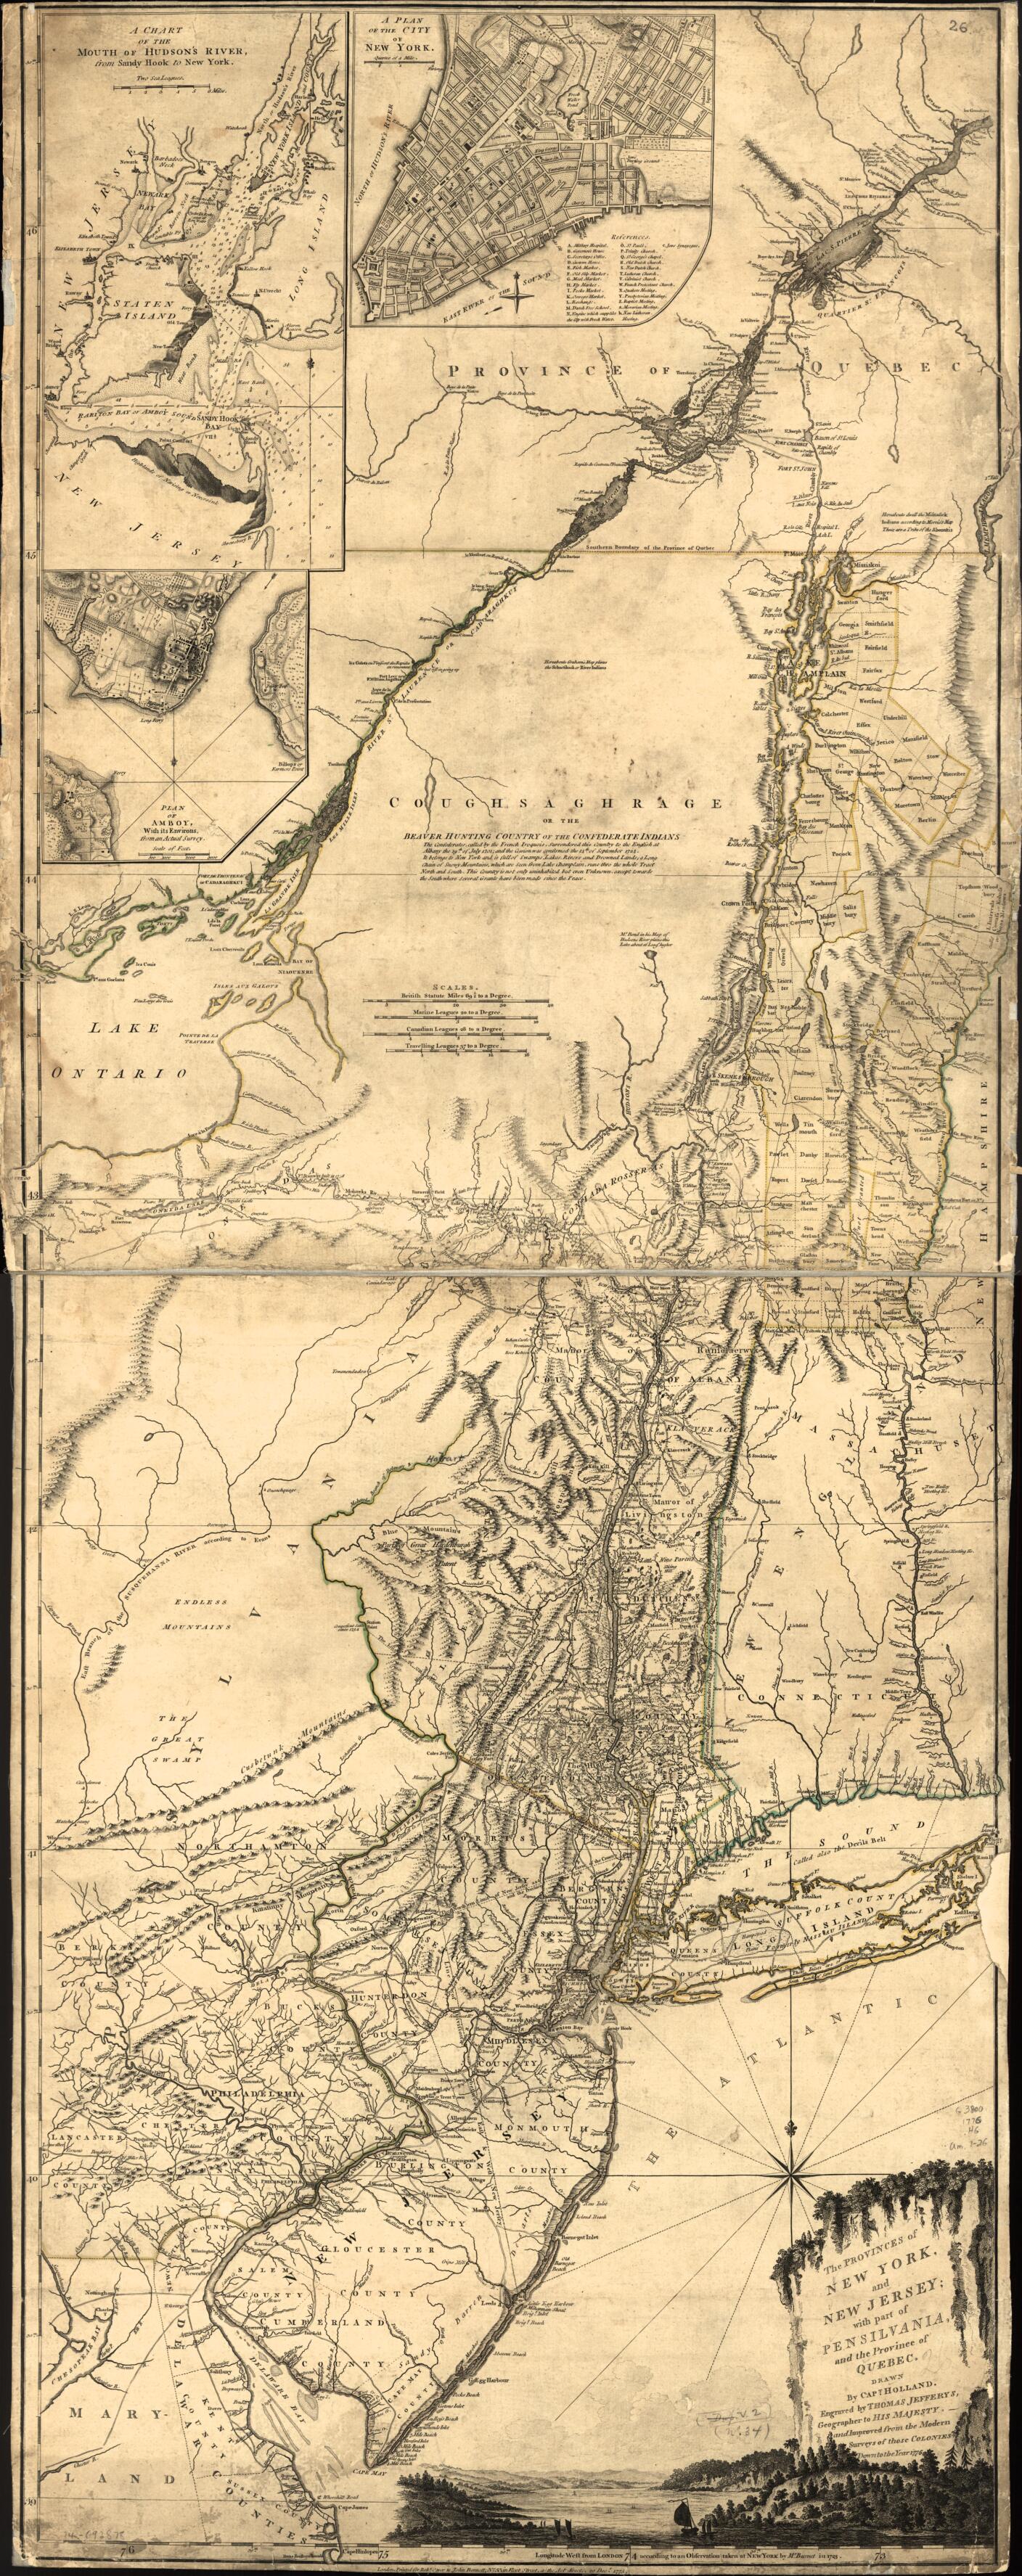 This old map of The Provinces of New York and New Jersey; With Part of Pensilvania, and the Province of Quebec from 1776 was created by Samuel Holland, Thomas Jefferys,  Robert Sayer and John Bennett (Firm) in 1776